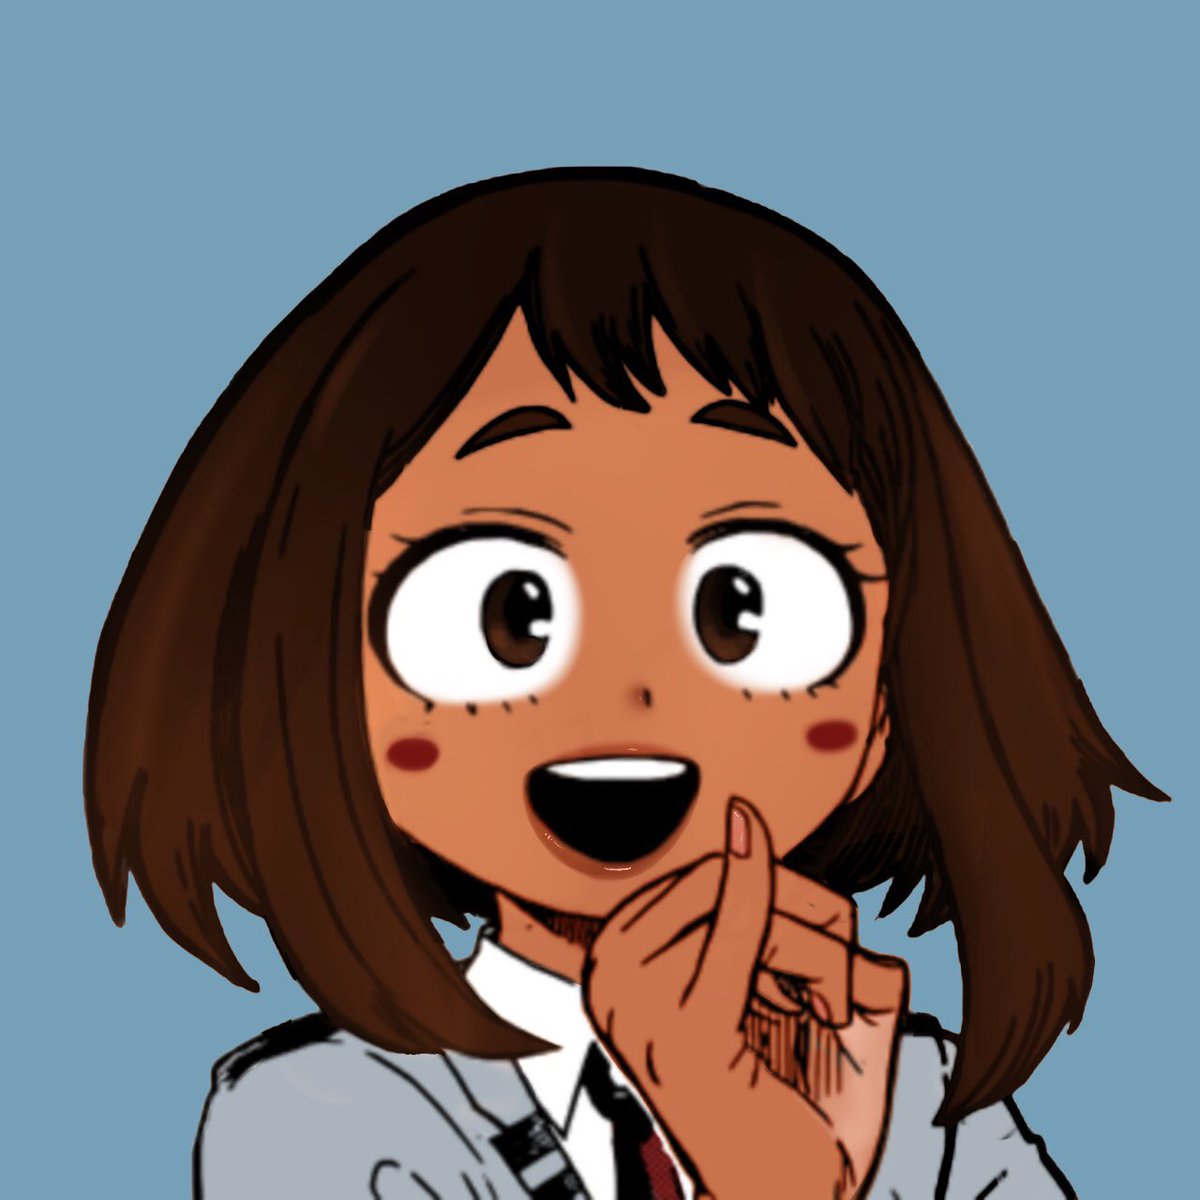 I colored Ochako in my palette bc desi Ochako has always been a need for me